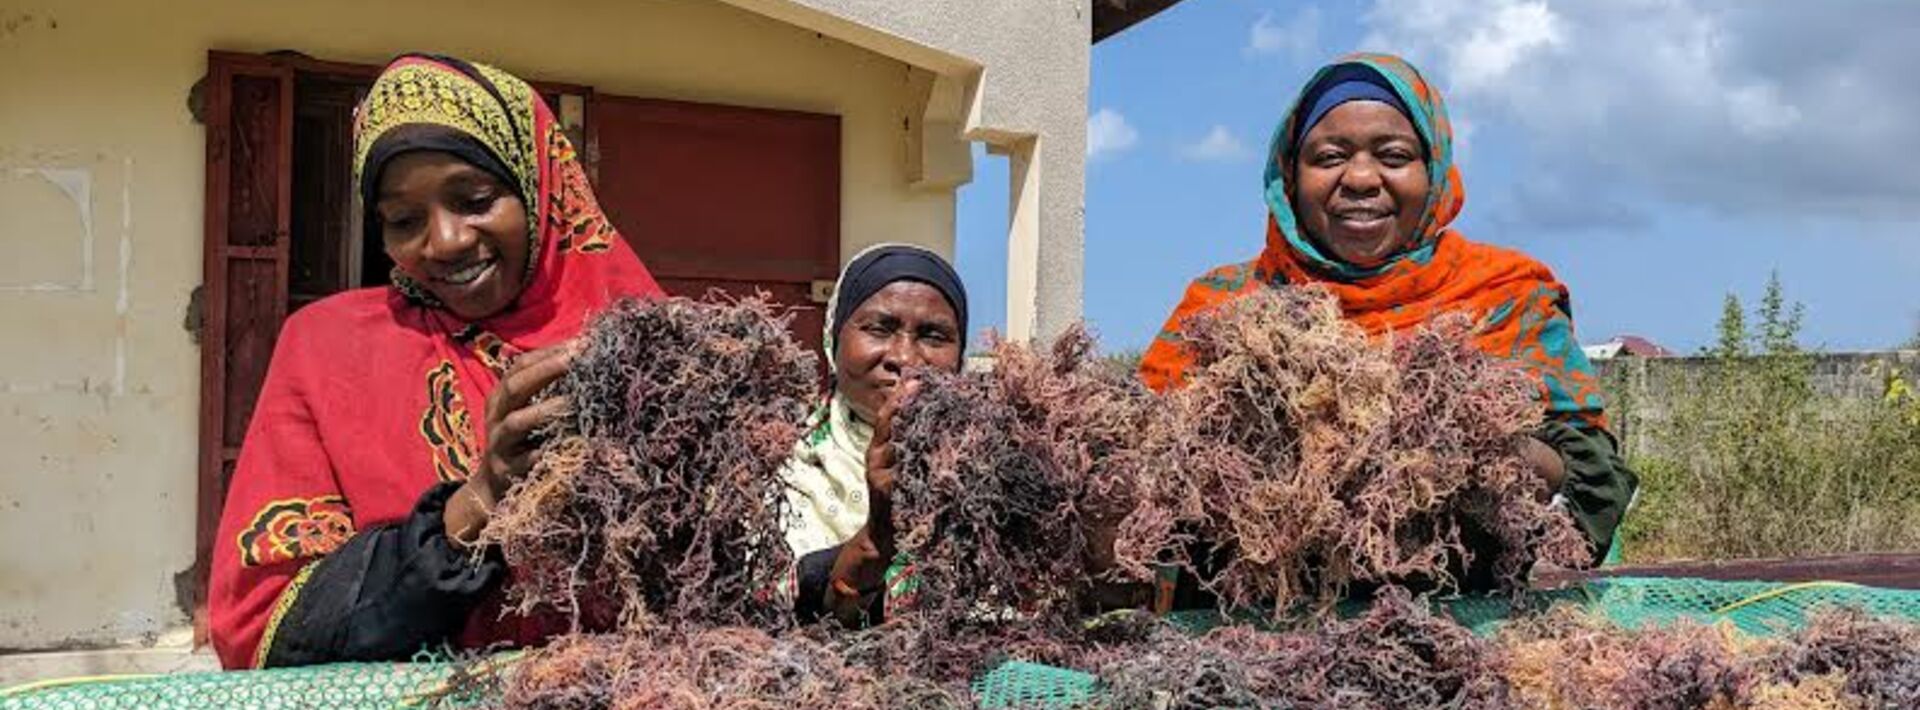 Two women with seaweed in their hands